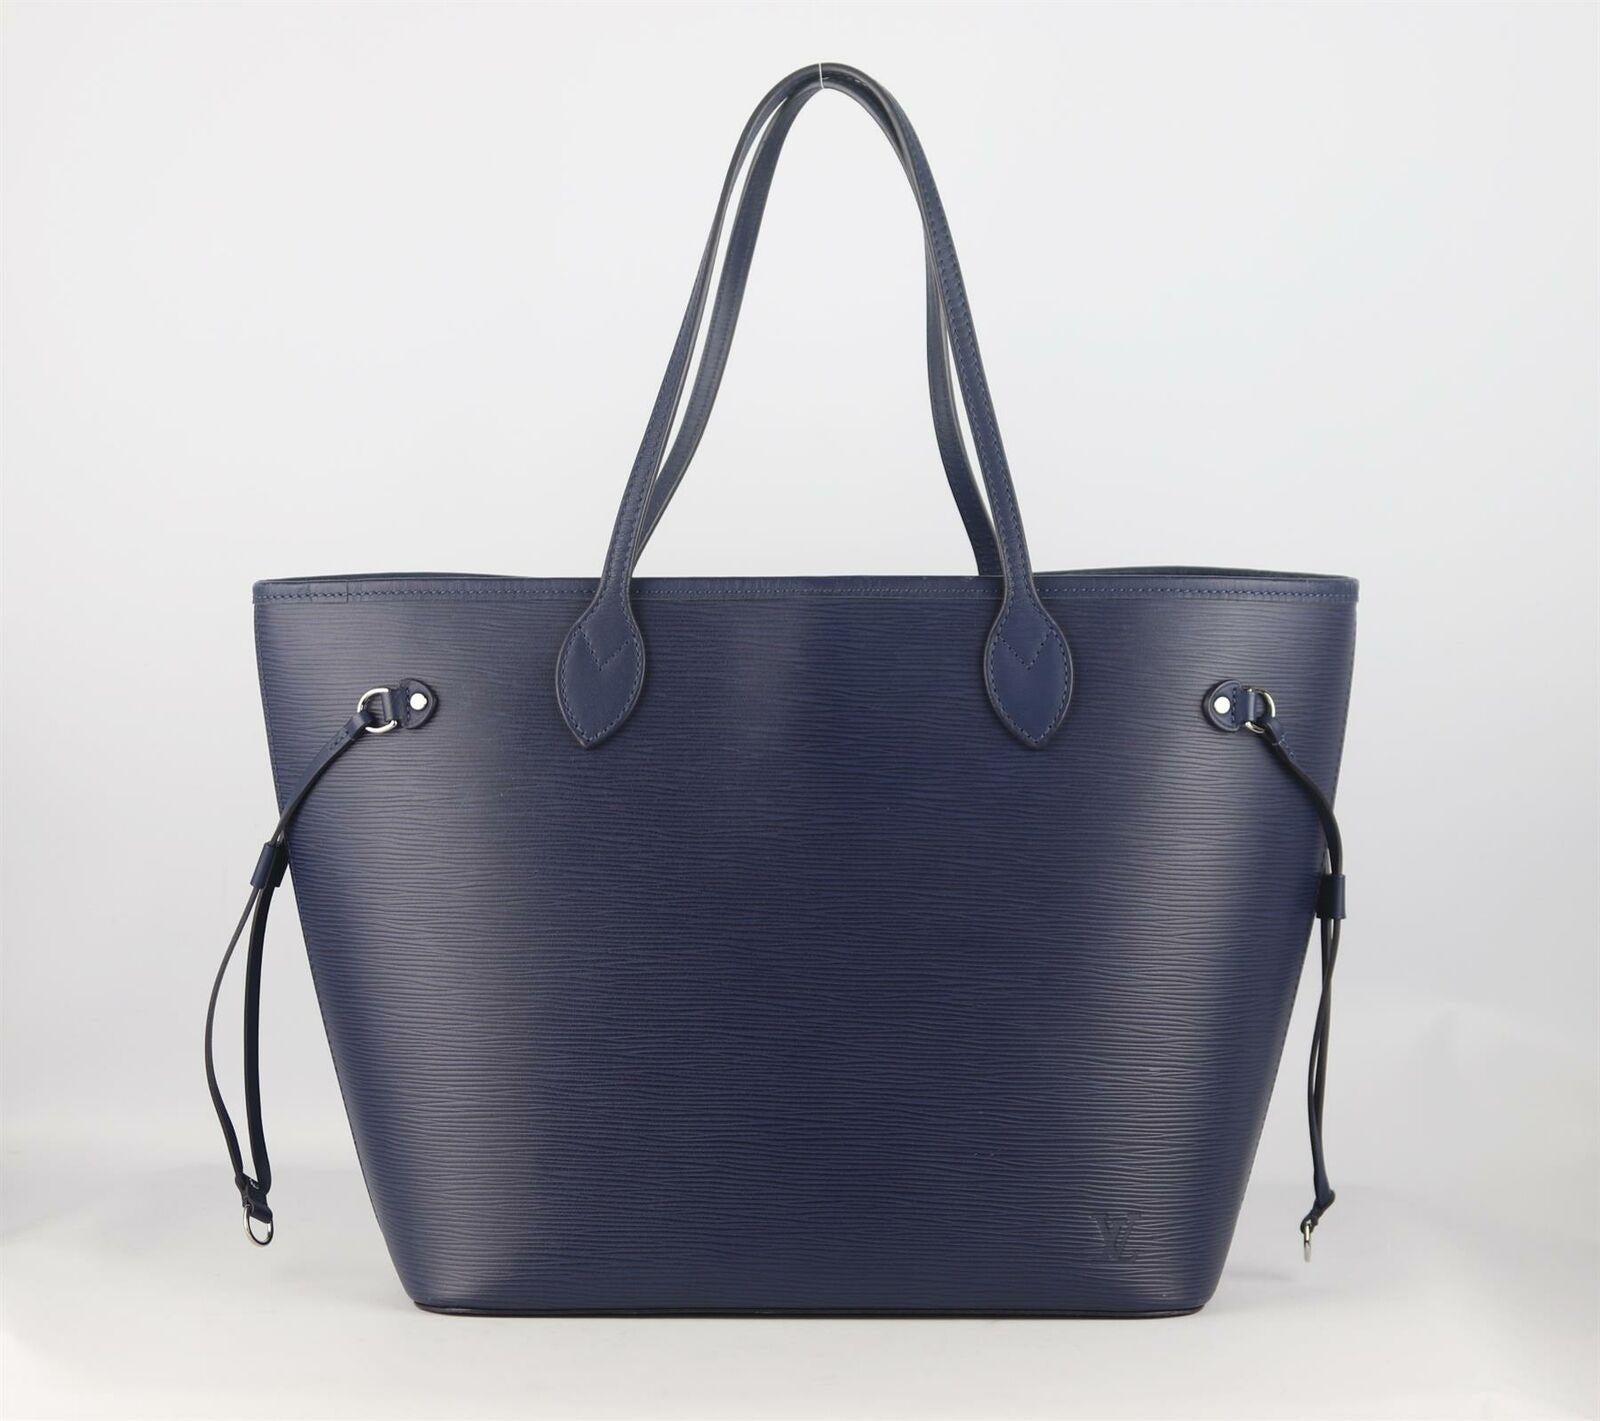 Louis Vuitton's iconic 'Neverfall' bag gets a ladylike update in navy epi leather with navy leather accents, this 'MM' structured style has a spacious compartment lined in soft suede with internal clip to attach your items too.
Navy leather